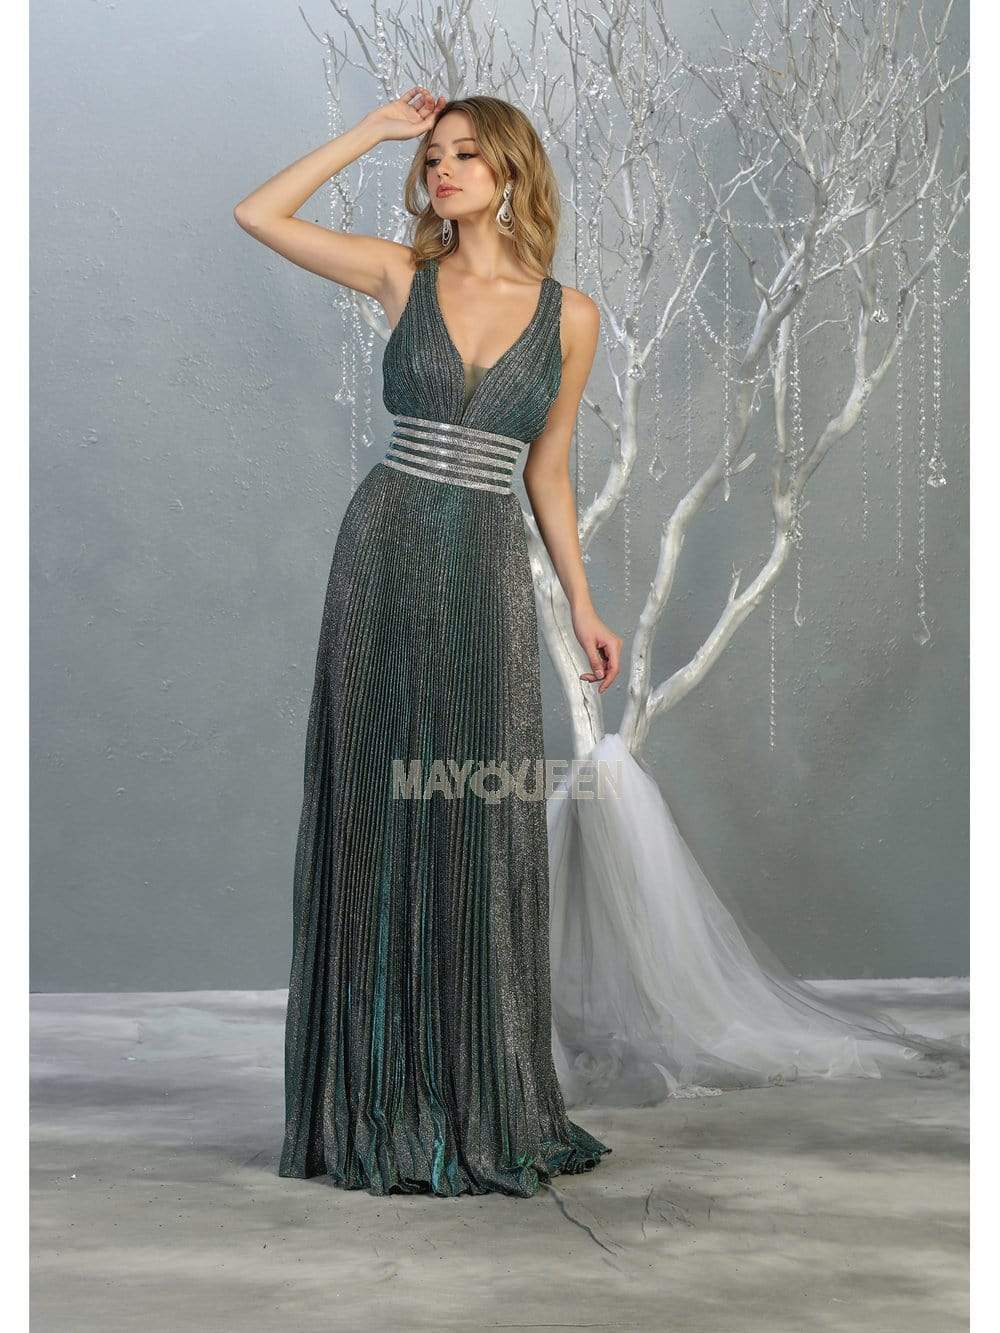 Image of May Queen - RQ7828 Strappy Plunging V-Neck A-Line Dress